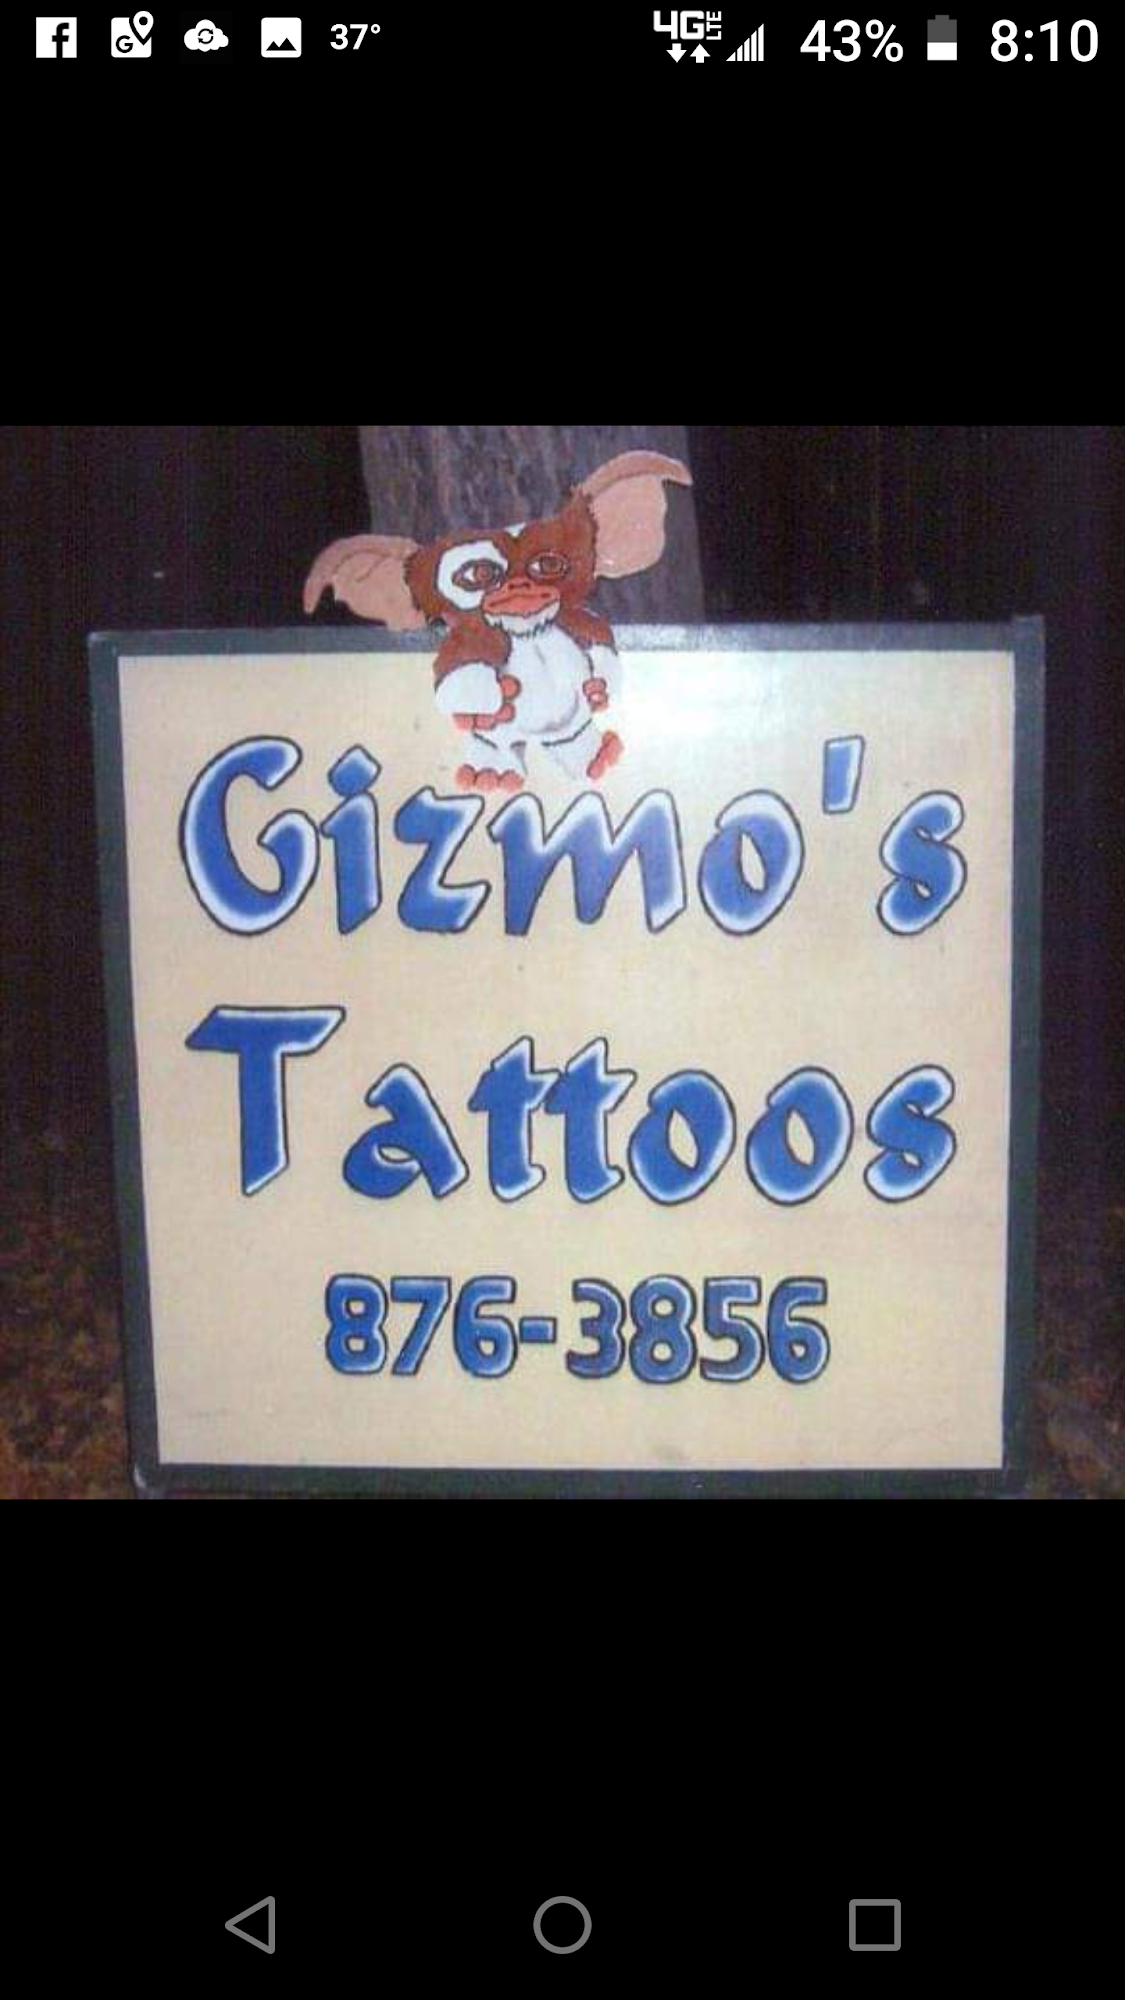 Gizmo's Tattoos 25 S Main St, Guilford Maine 04443